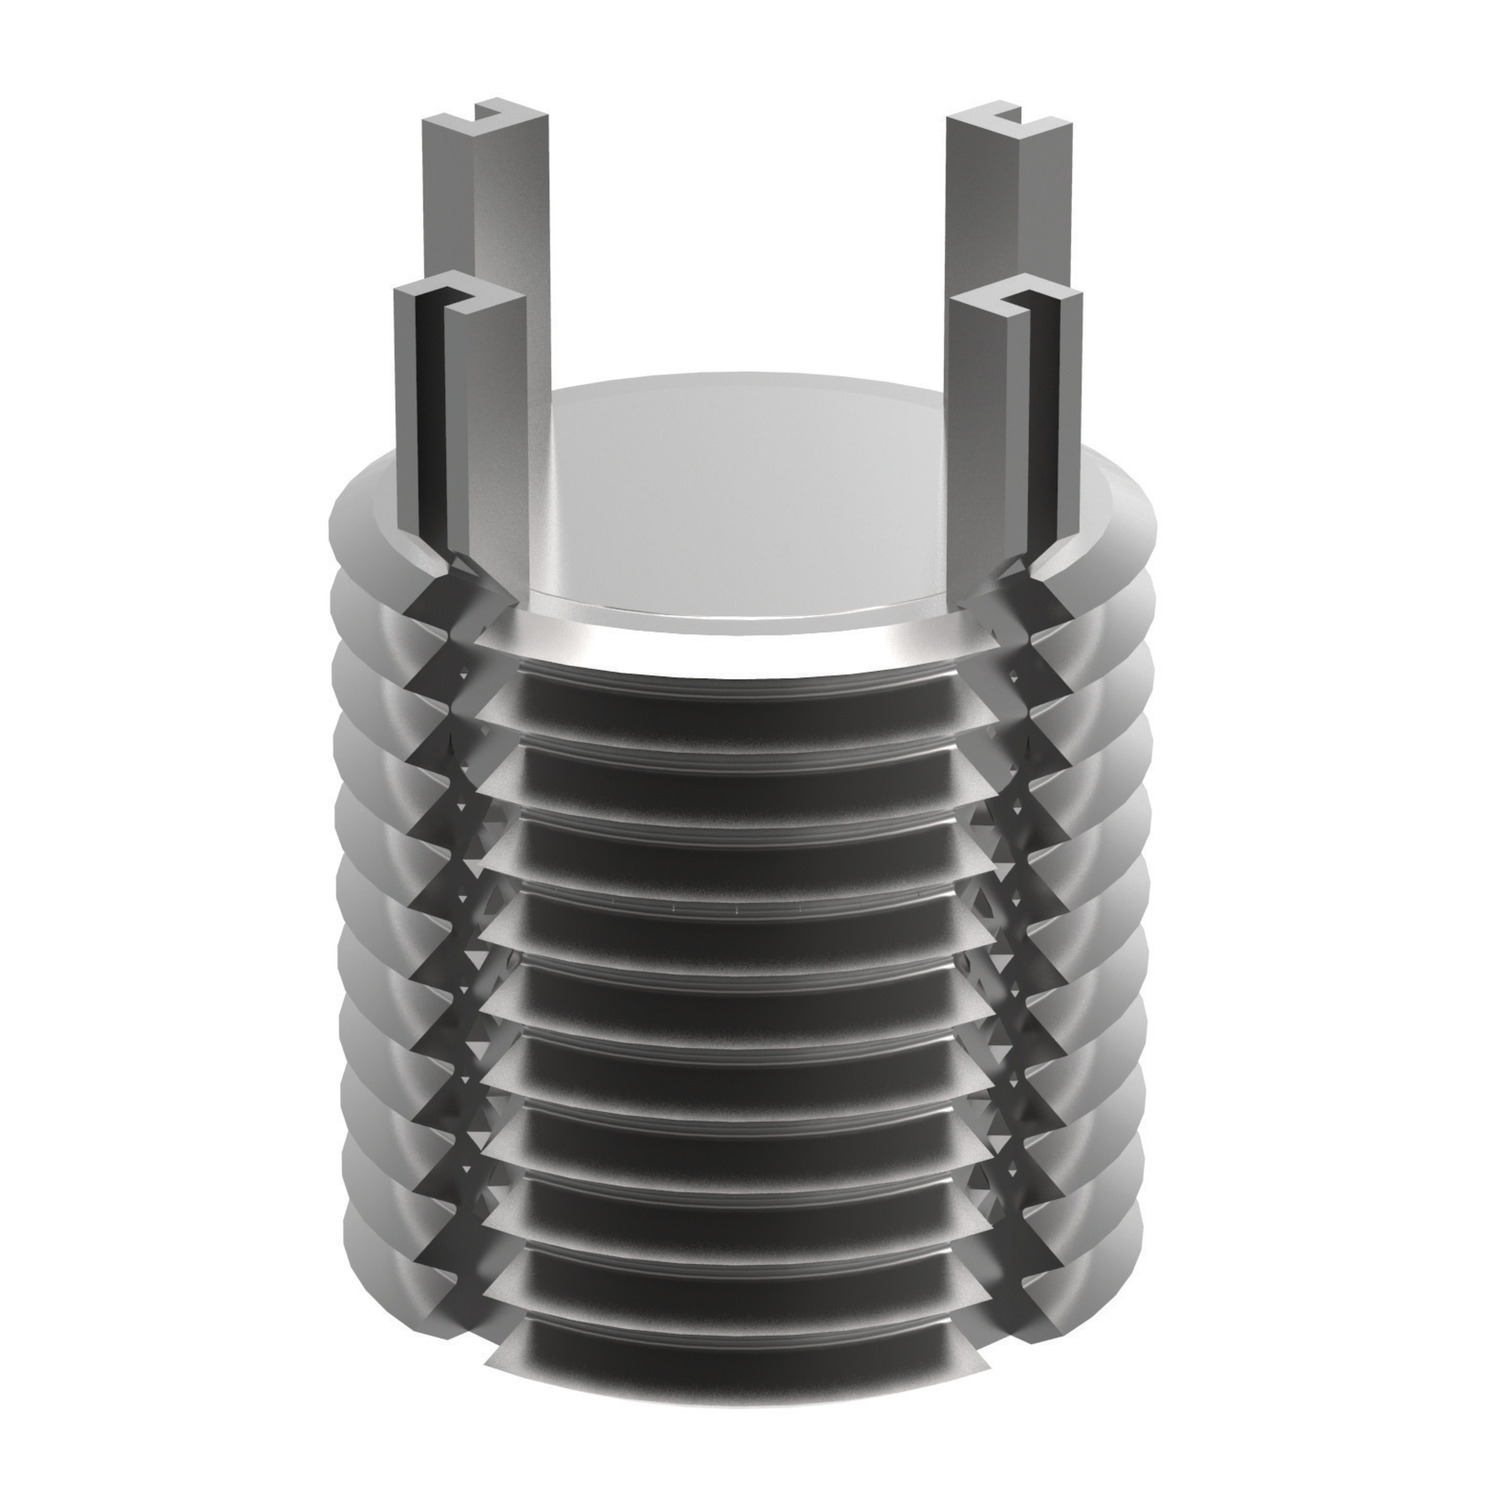 Product 22042, Threaded Insert - Solid - Metric stainless steel / 